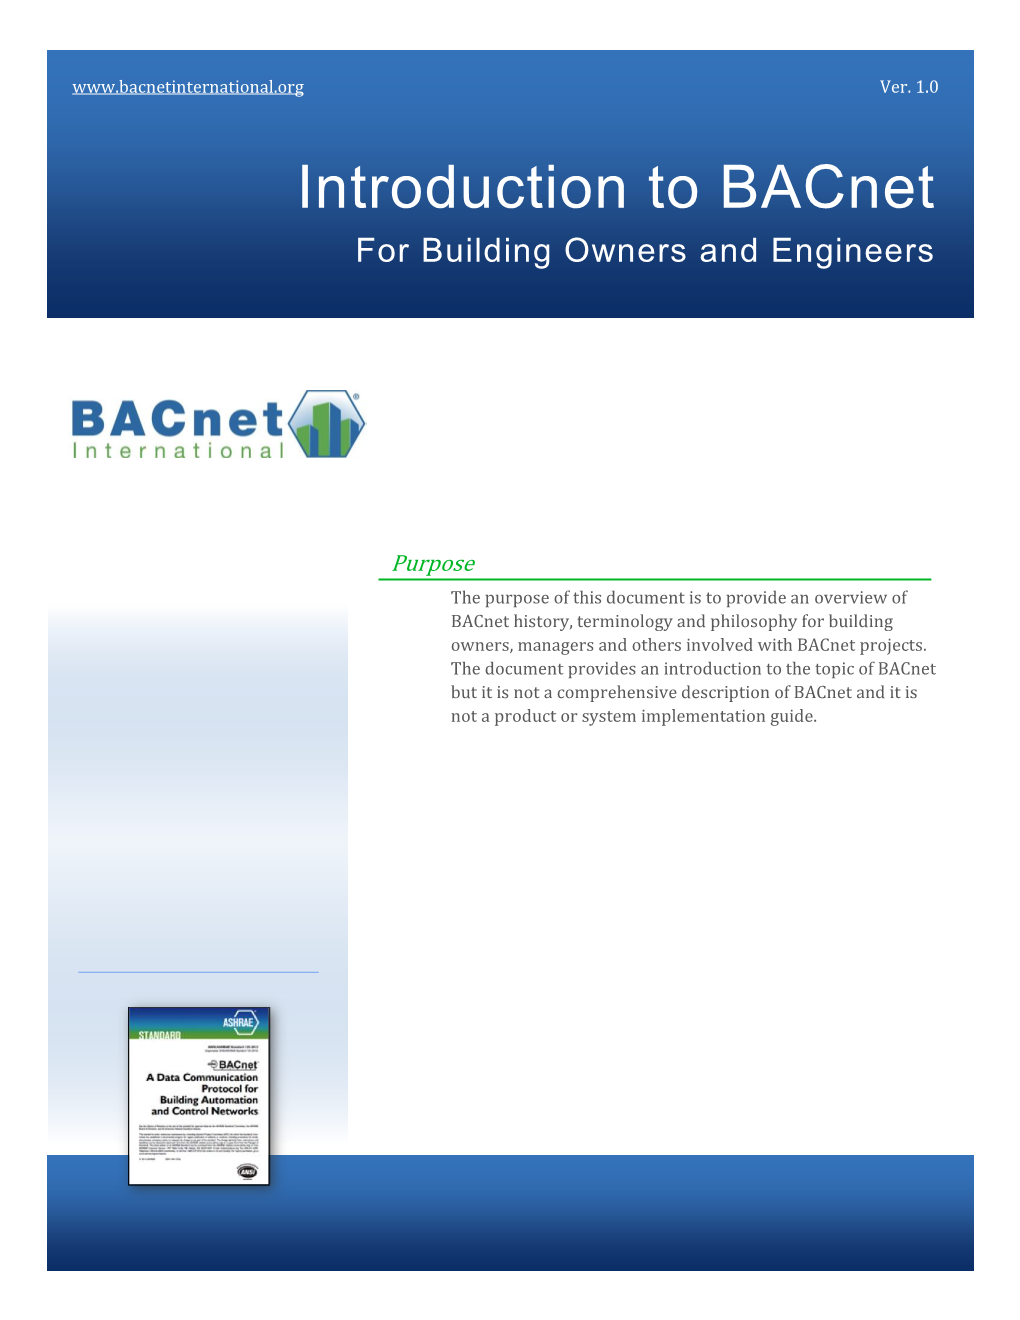 Introduction to Bacnet for Building Owners and Engineers